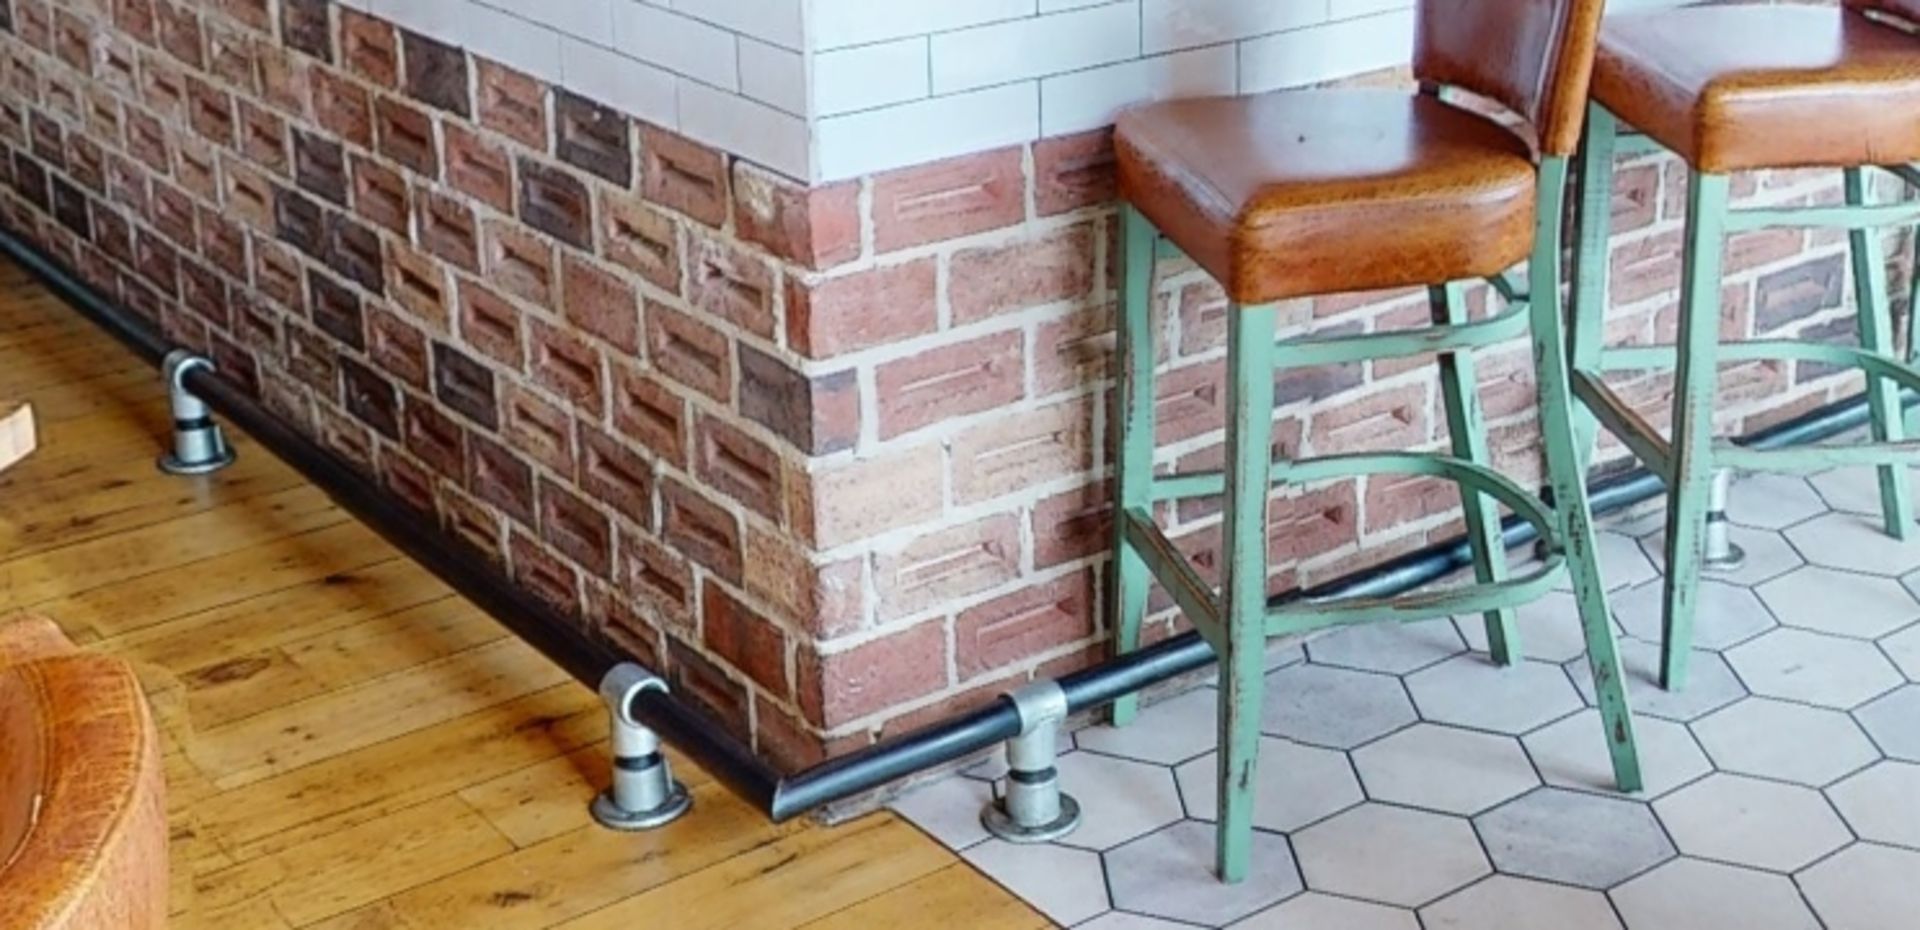 1 x Industrial Style Bar Footrest With L Shaped Pipe and Steel Pipe Fitting Brackets - L660 x W360cm - Image 2 of 4